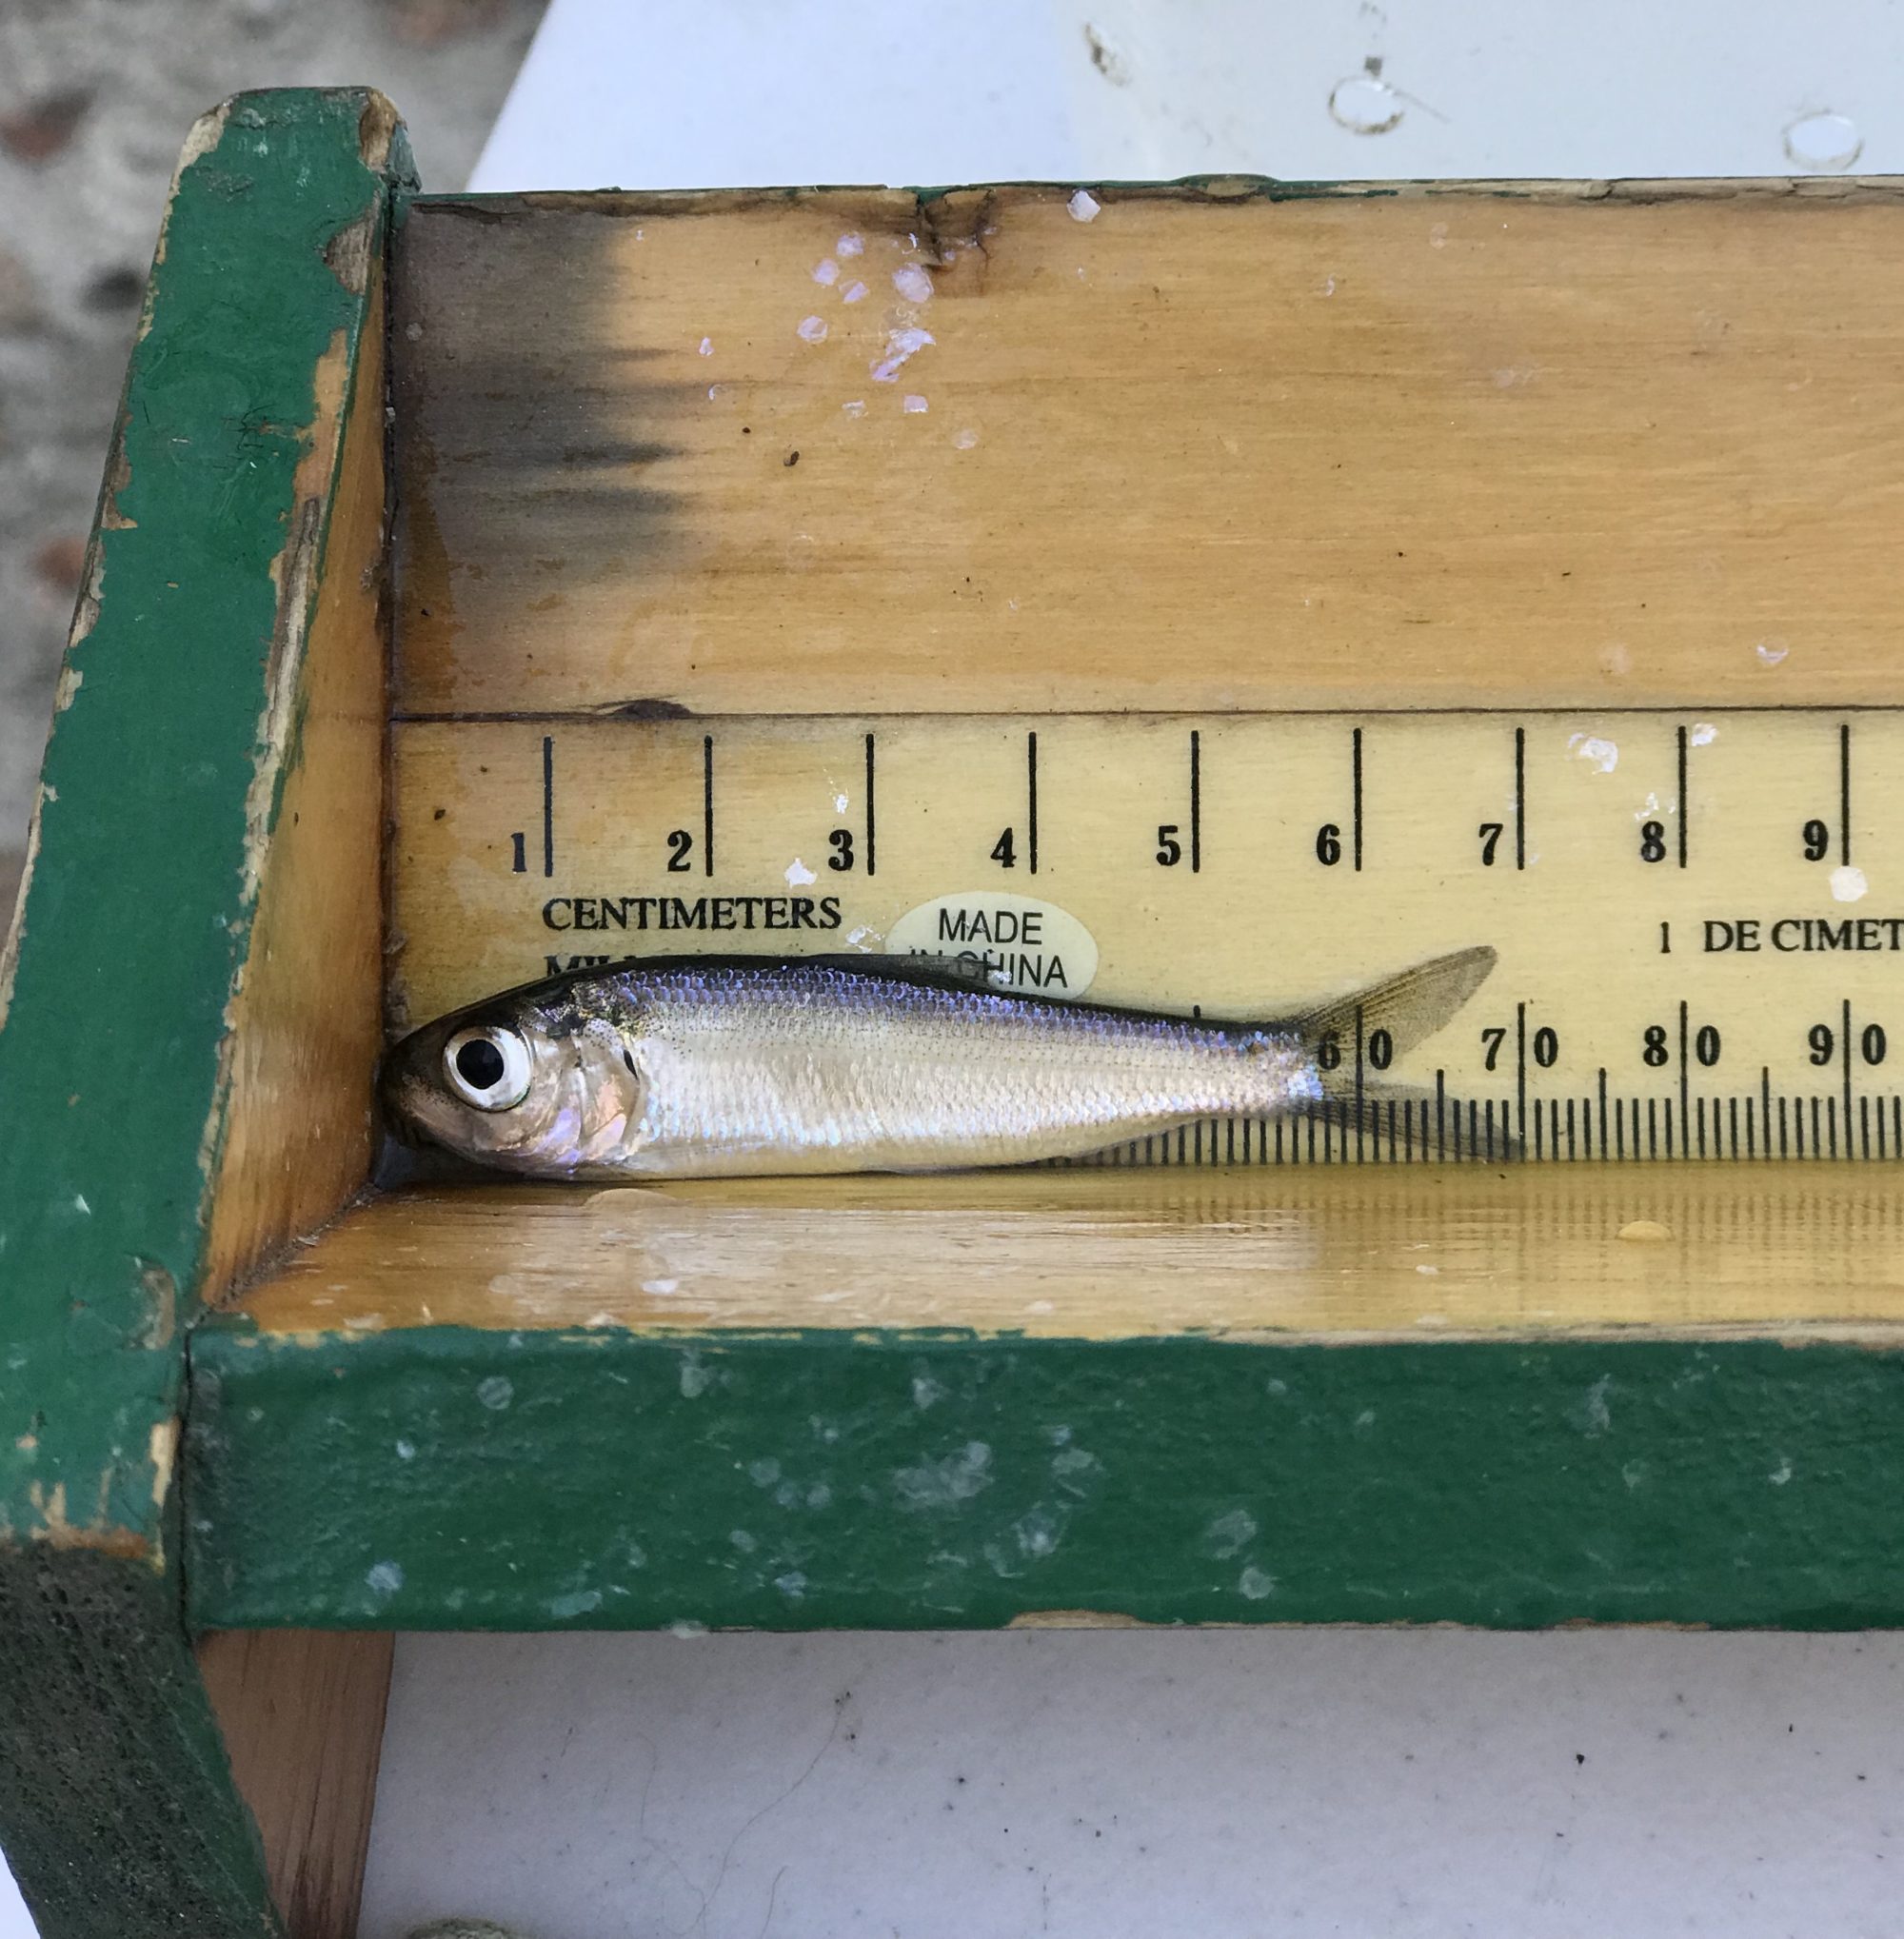 A juvenile alewife being measured as part of a small sampling survey at Bride Lake.